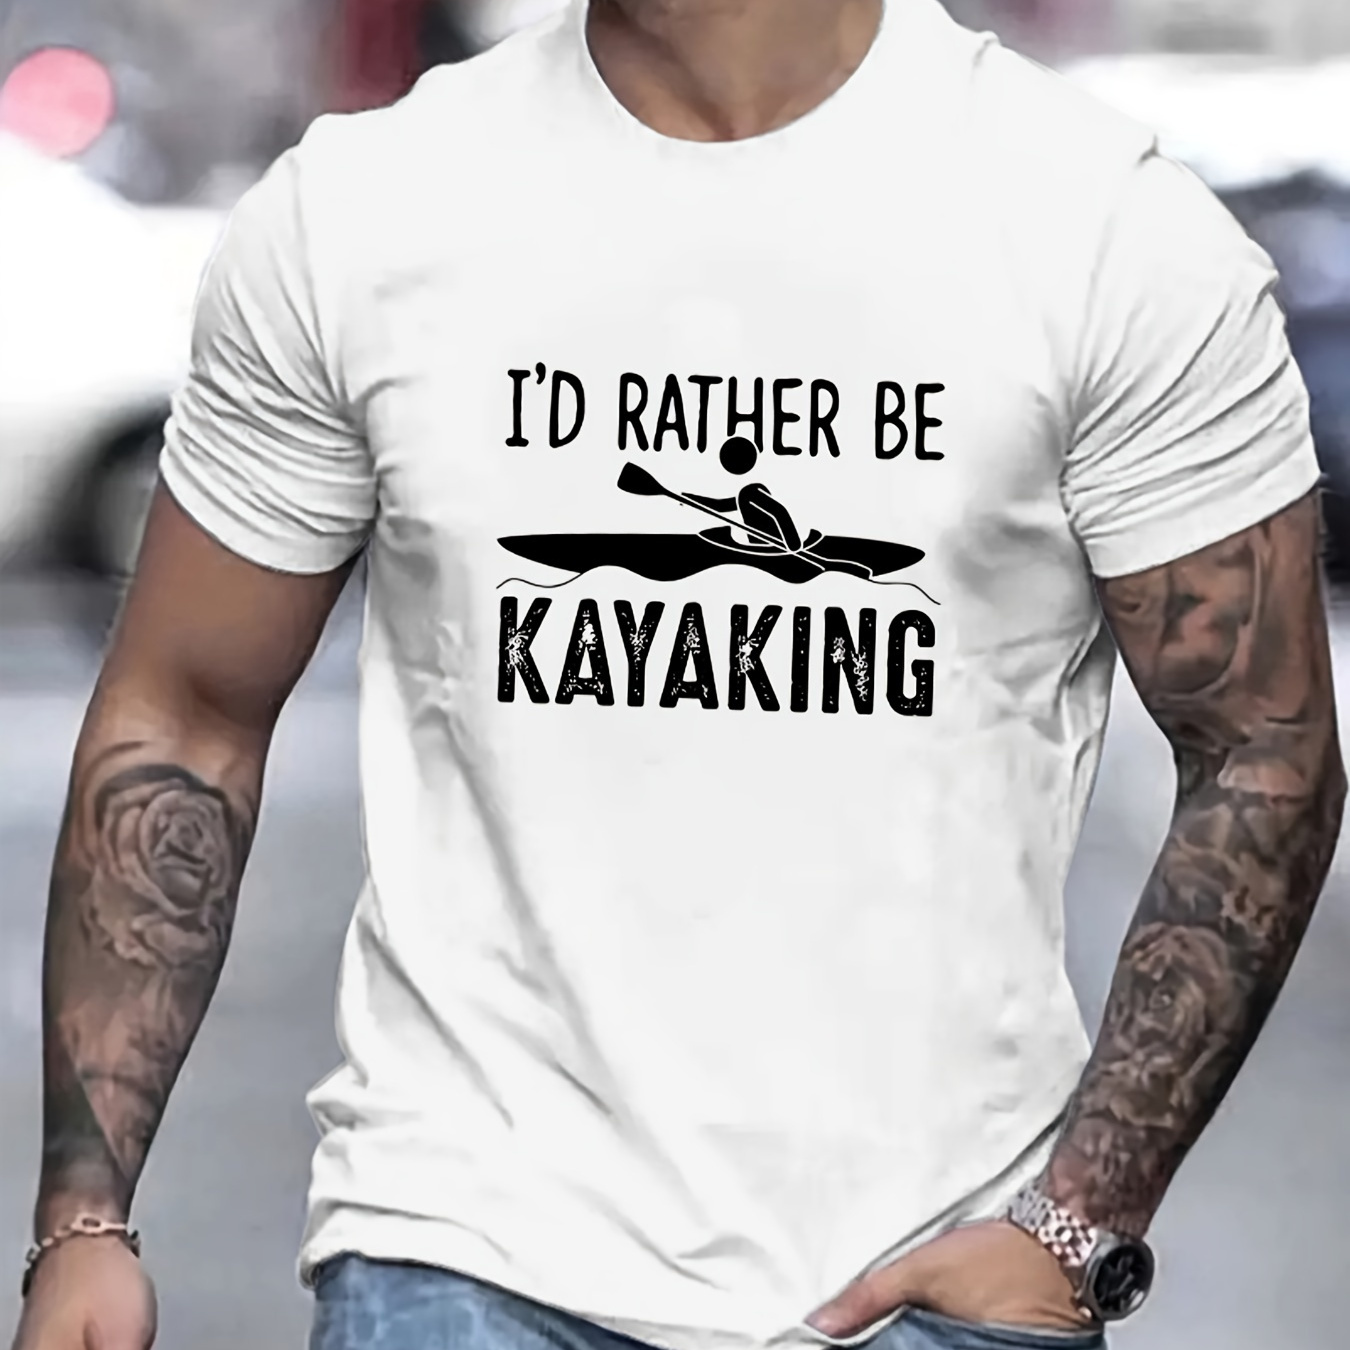 

I'd Rather Be Kayaking Print T Shirt, Tees For Men, Casual Short Sleeve T-shirt For Summer